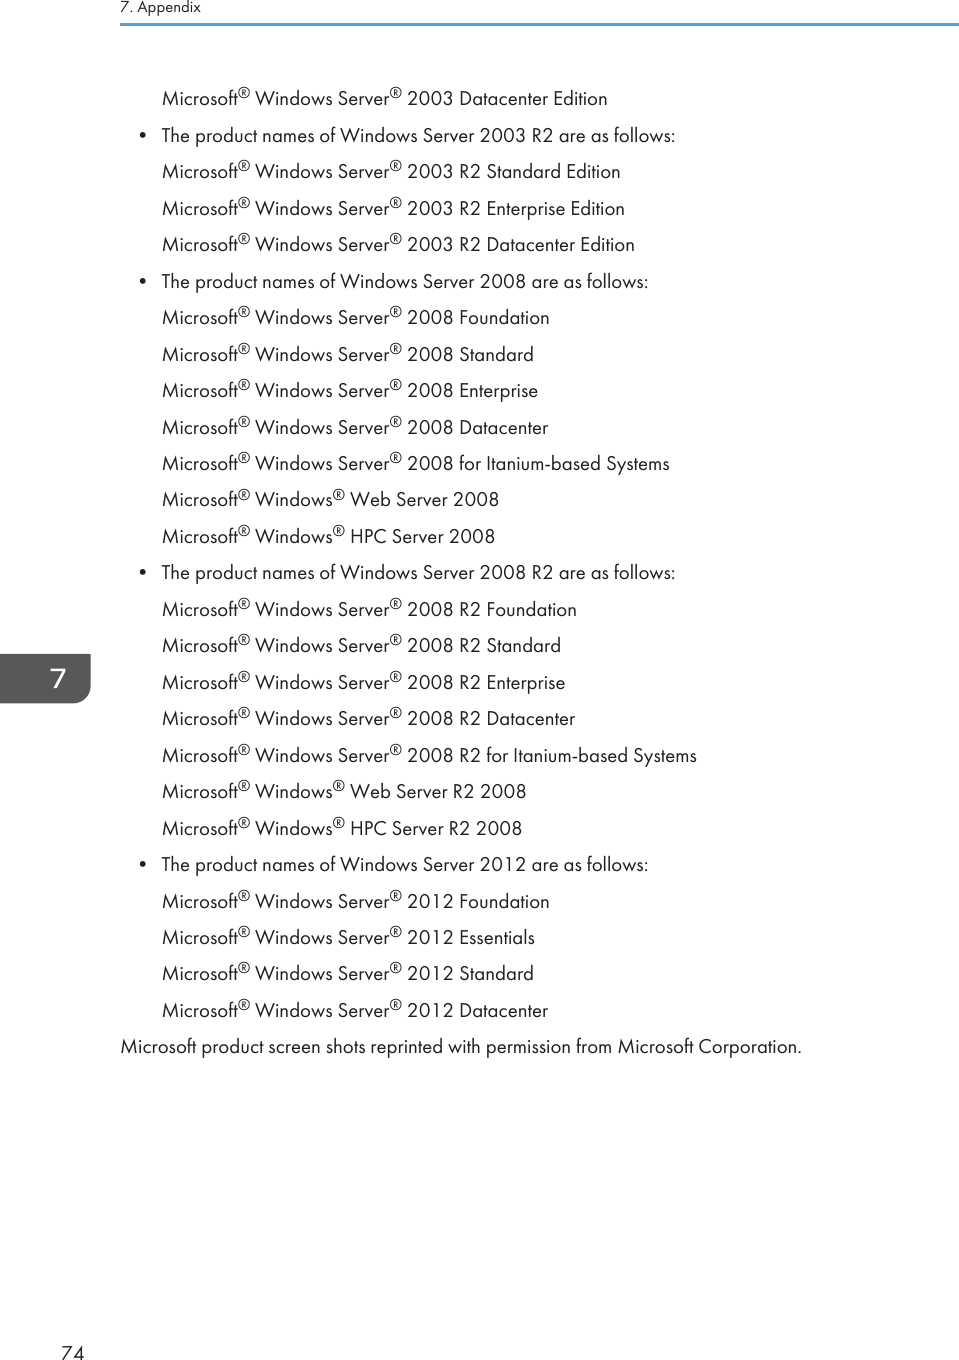 Microsoft® Windows Server® 2003 Datacenter Edition• The product names of Windows Server 2003 R2 are as follows:Microsoft® Windows Server® 2003 R2 Standard EditionMicrosoft® Windows Server® 2003 R2 Enterprise EditionMicrosoft® Windows Server® 2003 R2 Datacenter Edition• The product names of Windows Server 2008 are as follows:Microsoft® Windows Server® 2008 FoundationMicrosoft® Windows Server® 2008 StandardMicrosoft® Windows Server® 2008 EnterpriseMicrosoft® Windows Server® 2008 DatacenterMicrosoft® Windows Server® 2008 for Itanium-based SystemsMicrosoft® Windows® Web Server 2008Microsoft® Windows® HPC Server 2008• The product names of Windows Server 2008 R2 are as follows:Microsoft® Windows Server® 2008 R2 FoundationMicrosoft® Windows Server® 2008 R2 StandardMicrosoft® Windows Server® 2008 R2 EnterpriseMicrosoft® Windows Server® 2008 R2 DatacenterMicrosoft® Windows Server® 2008 R2 for Itanium-based SystemsMicrosoft® Windows® Web Server R2 2008Microsoft® Windows® HPC Server R2 2008• The product names of Windows Server 2012 are as follows:Microsoft® Windows Server® 2012 FoundationMicrosoft® Windows Server® 2012 EssentialsMicrosoft® Windows Server® 2012 StandardMicrosoft® Windows Server® 2012 DatacenterMicrosoft product screen shots reprinted with permission from Microsoft Corporation.7. Appendix74